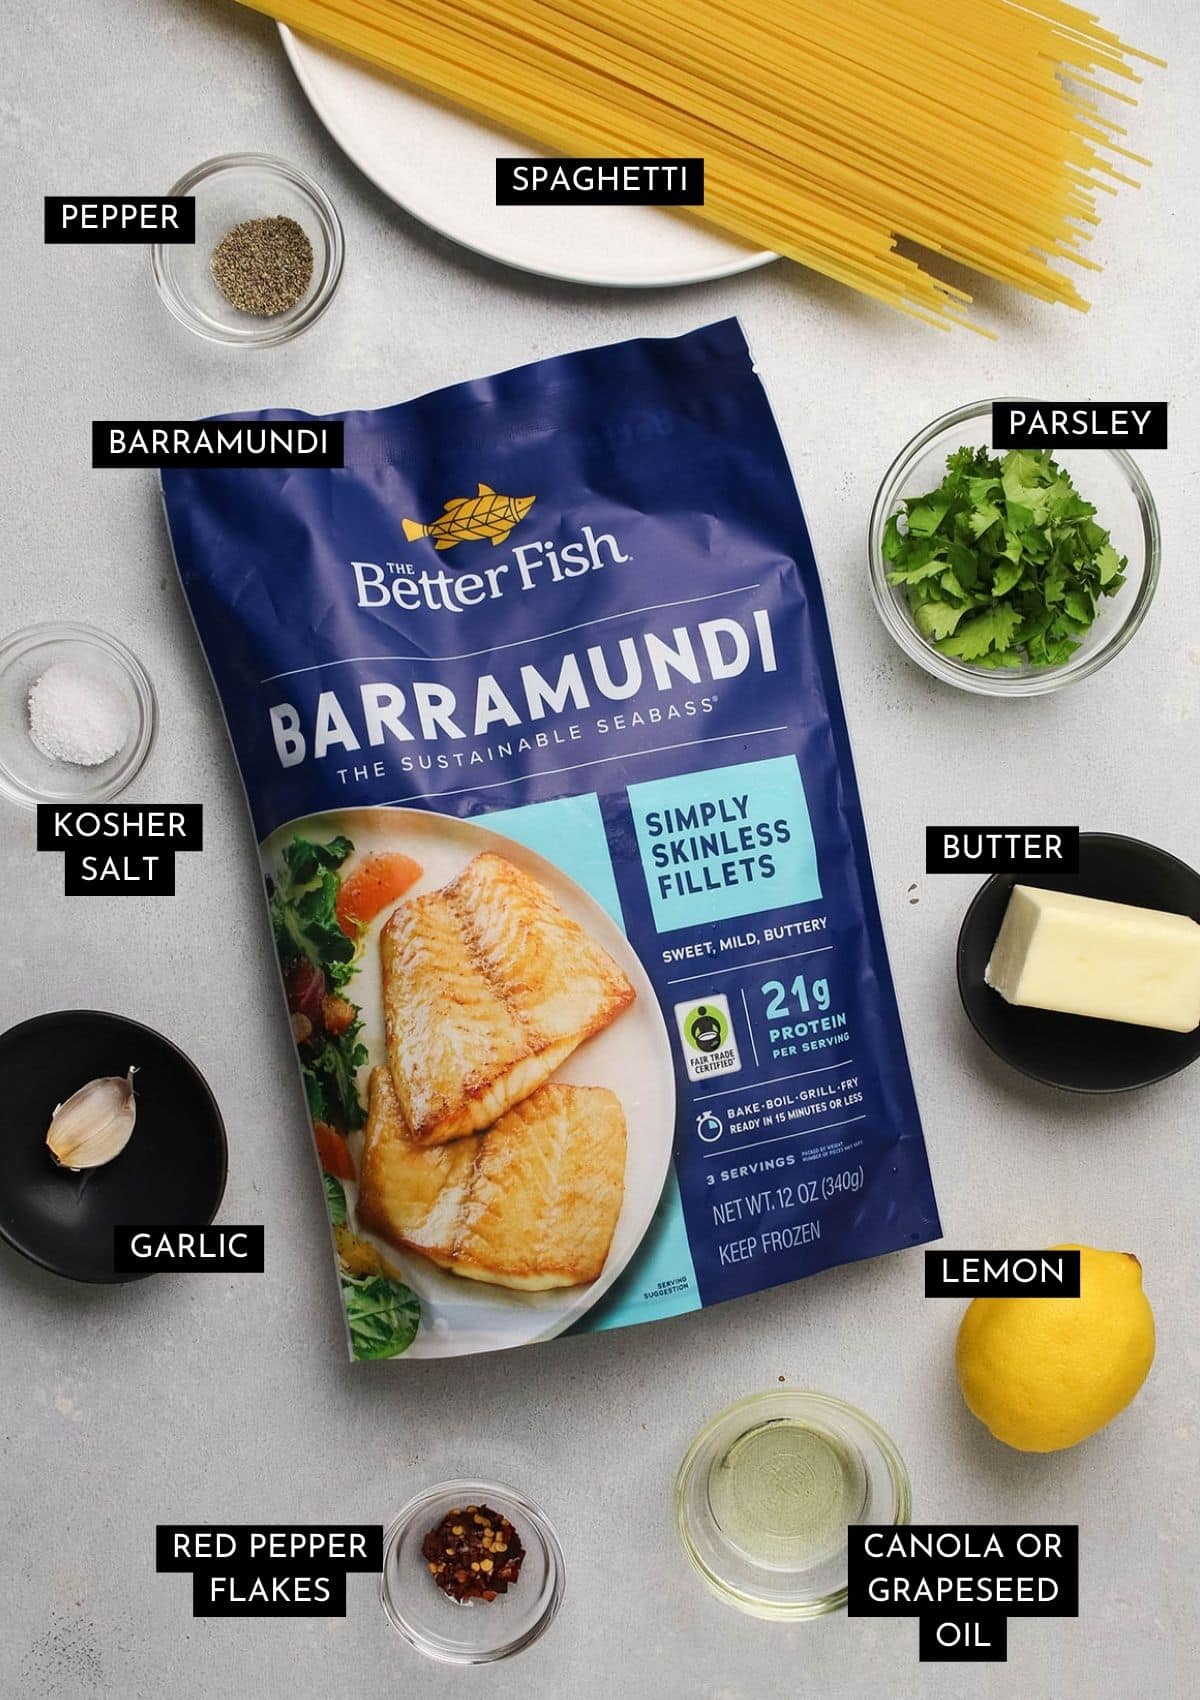 A bag of frozen barramundi fillets next to recipe ingredients measured into individual bowls.